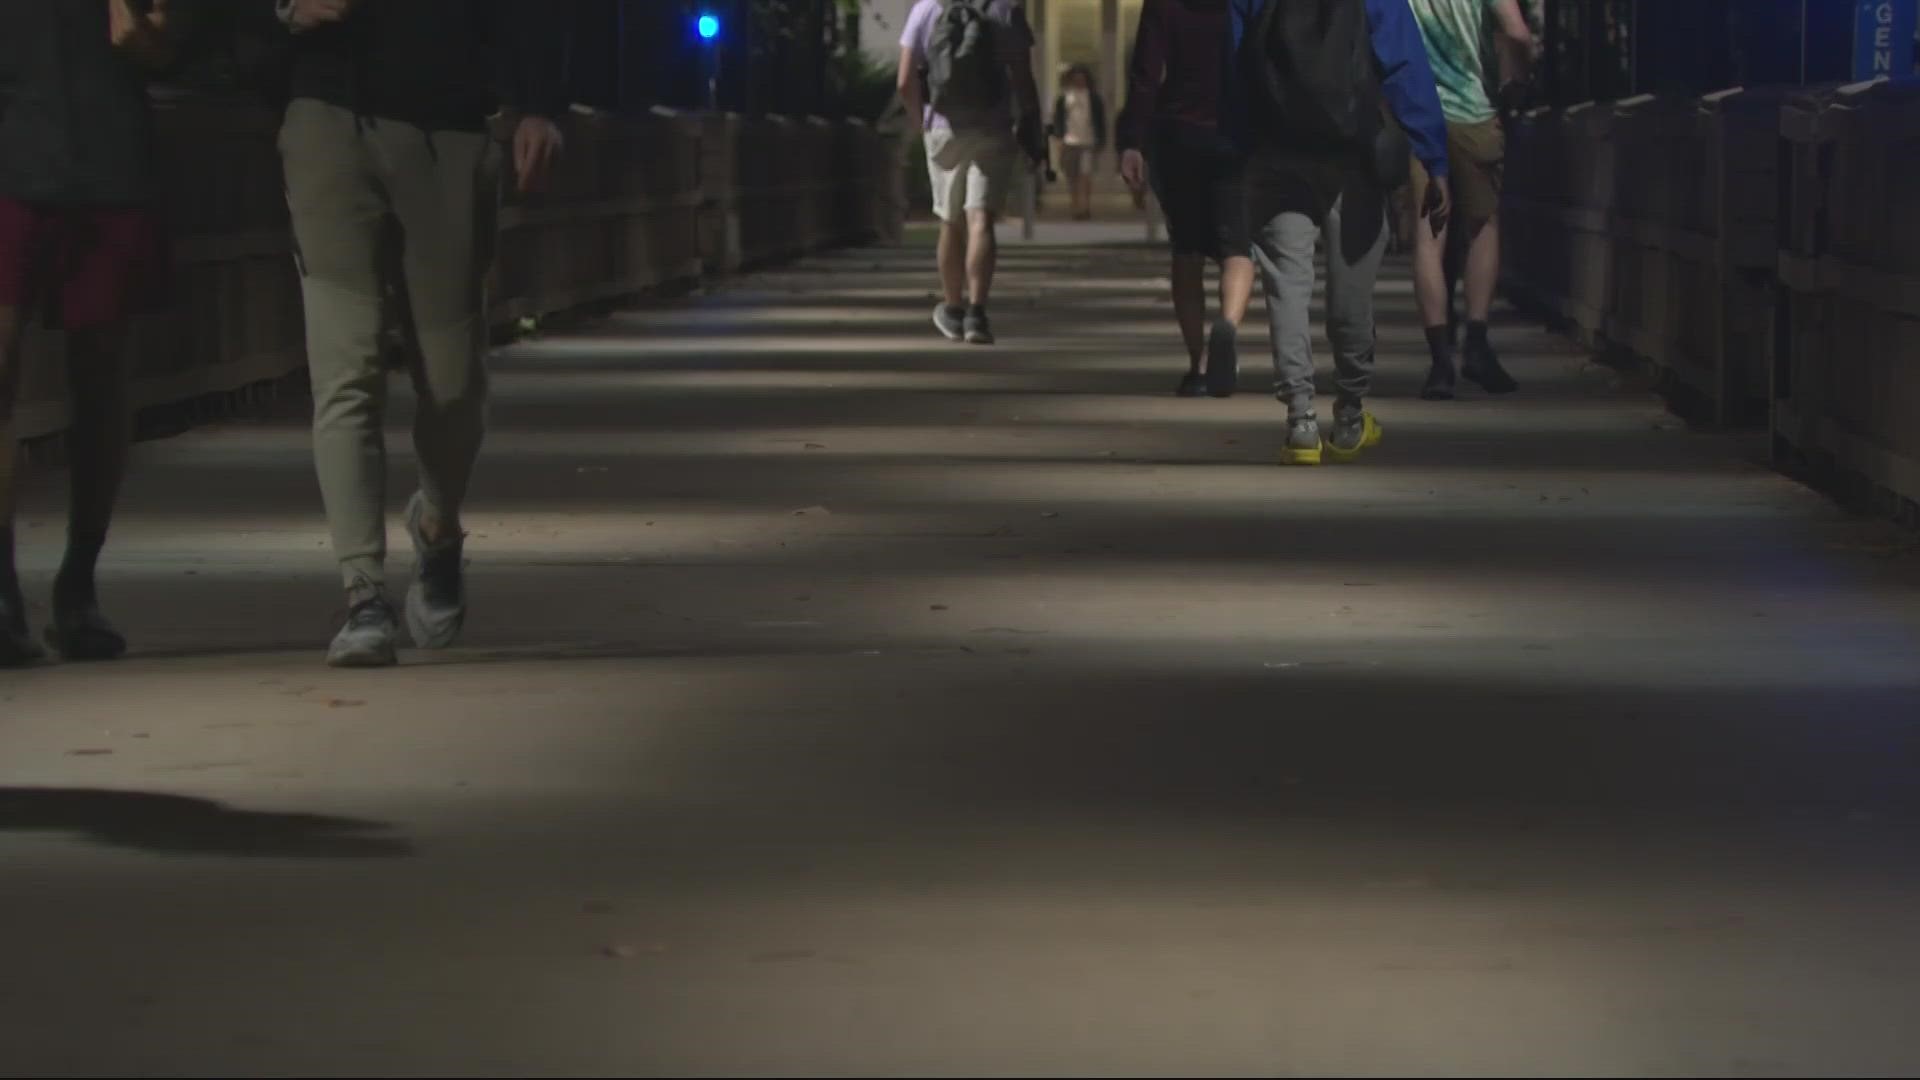 Campus police said a student was grabbed and fondled while walking across campus.